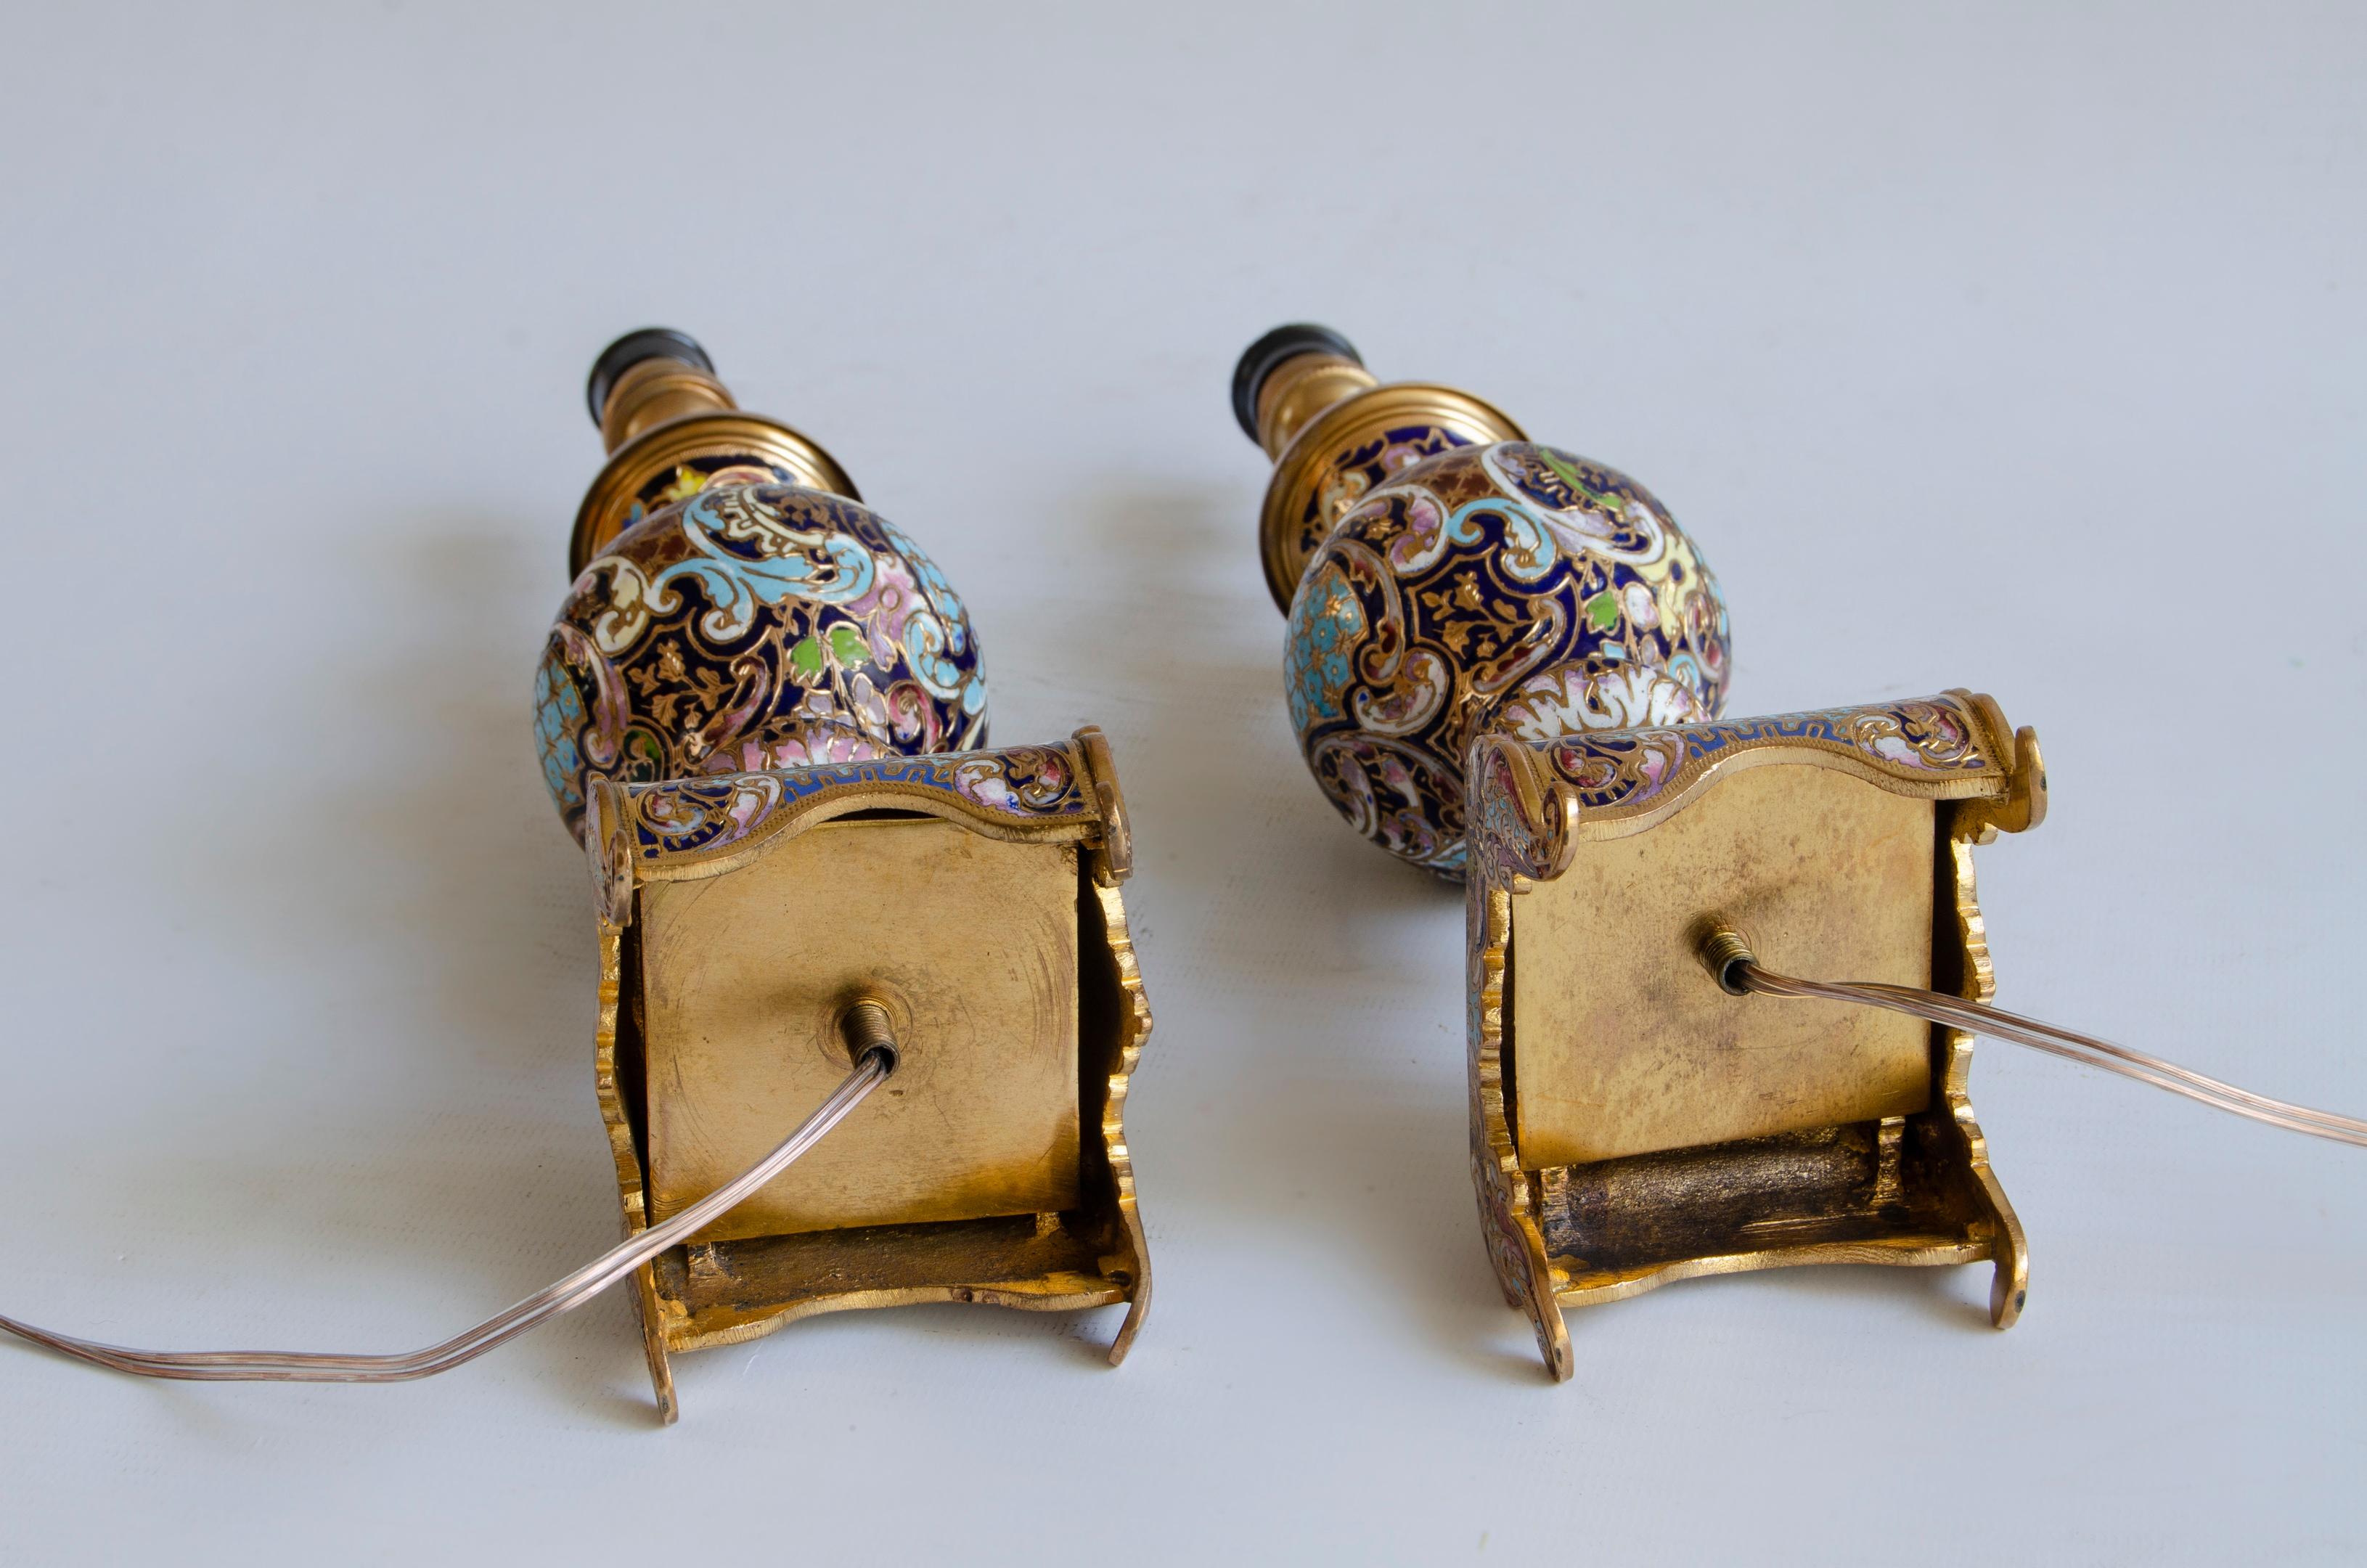 A pair of Napoleon III champleve lamps
Champleve enamel and ronce bedside lamps
electrified 220 w
19th century, circa 1870
origin France.
The Napoleon III style had its heyday during the 1850s and 1880s. Emperor Napoleon wanted to emulate the